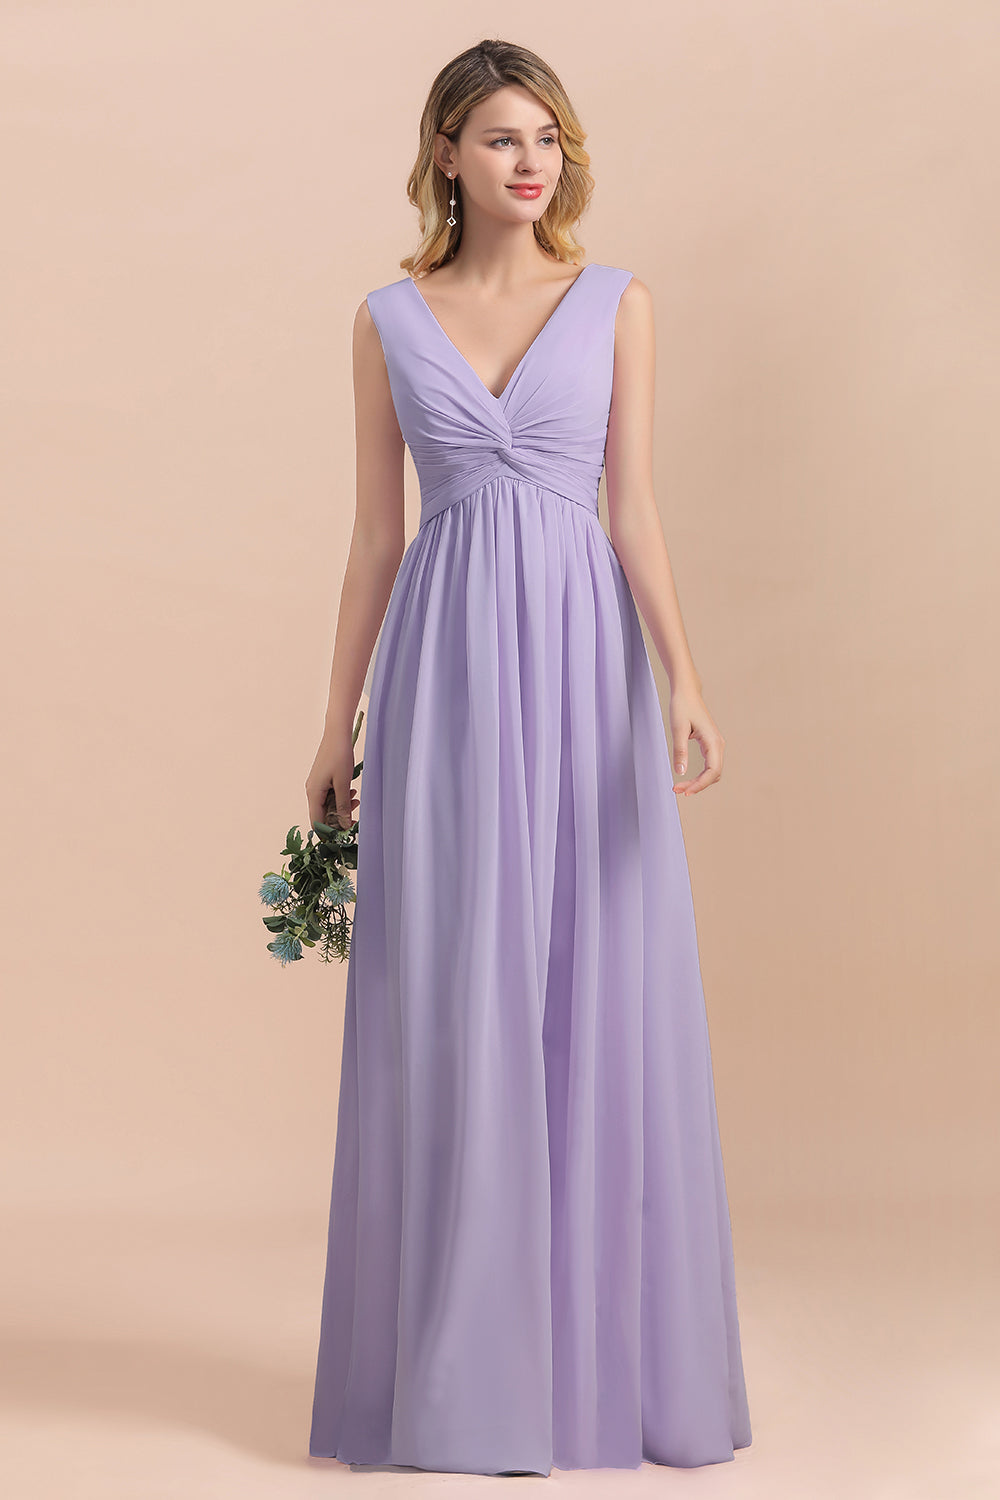 Load image into Gallery viewer, Gorgeous V-Neck Ruffle Lilac Chiffon Affordable Bridesmaid Dress with Ruffle-27dress
